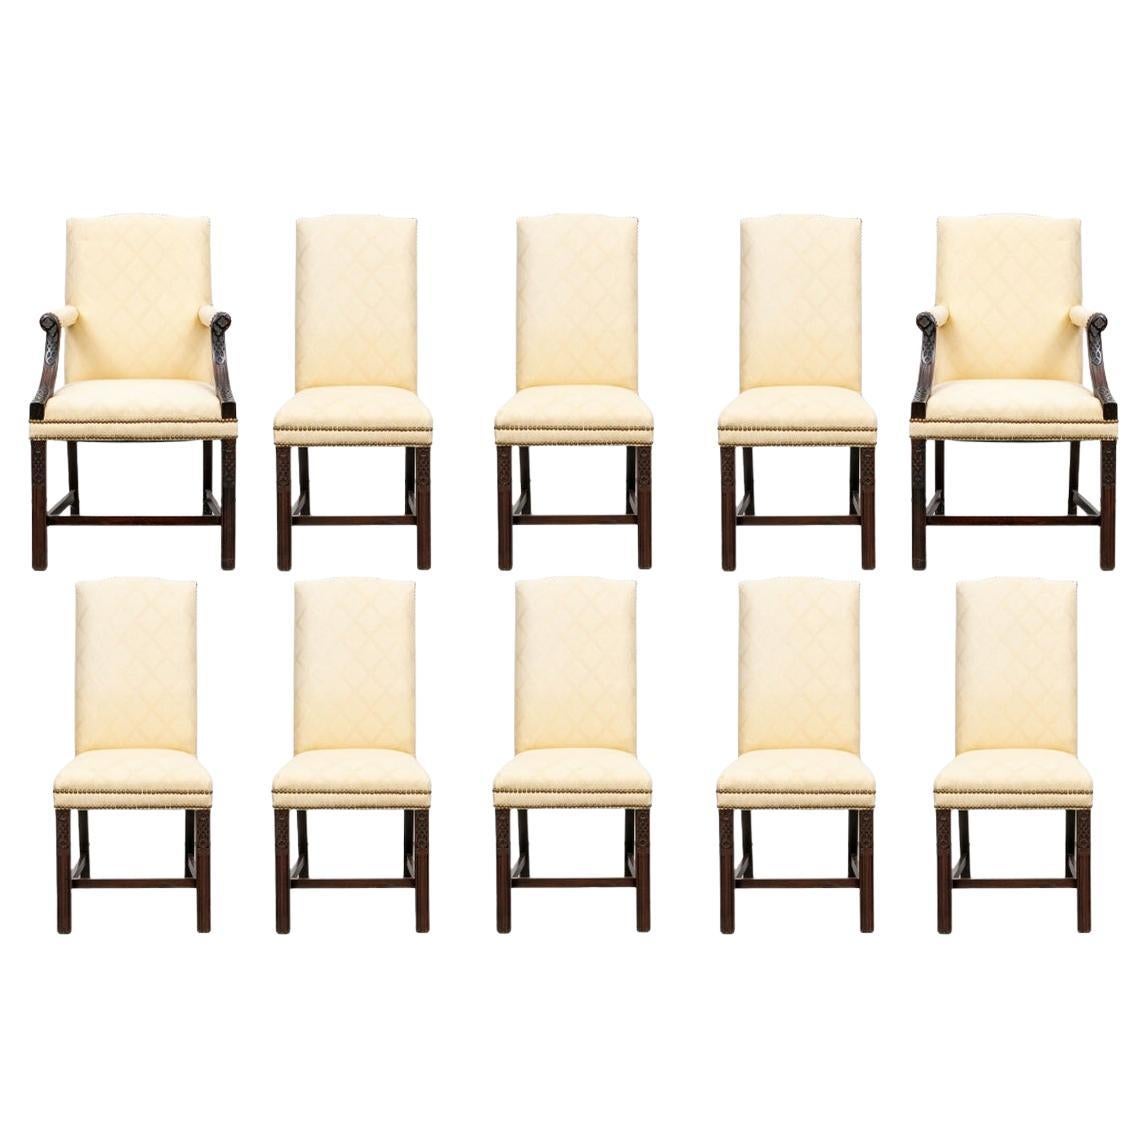 Exceptional Set Of 10 Tall Back Upholstered Dining Chairs